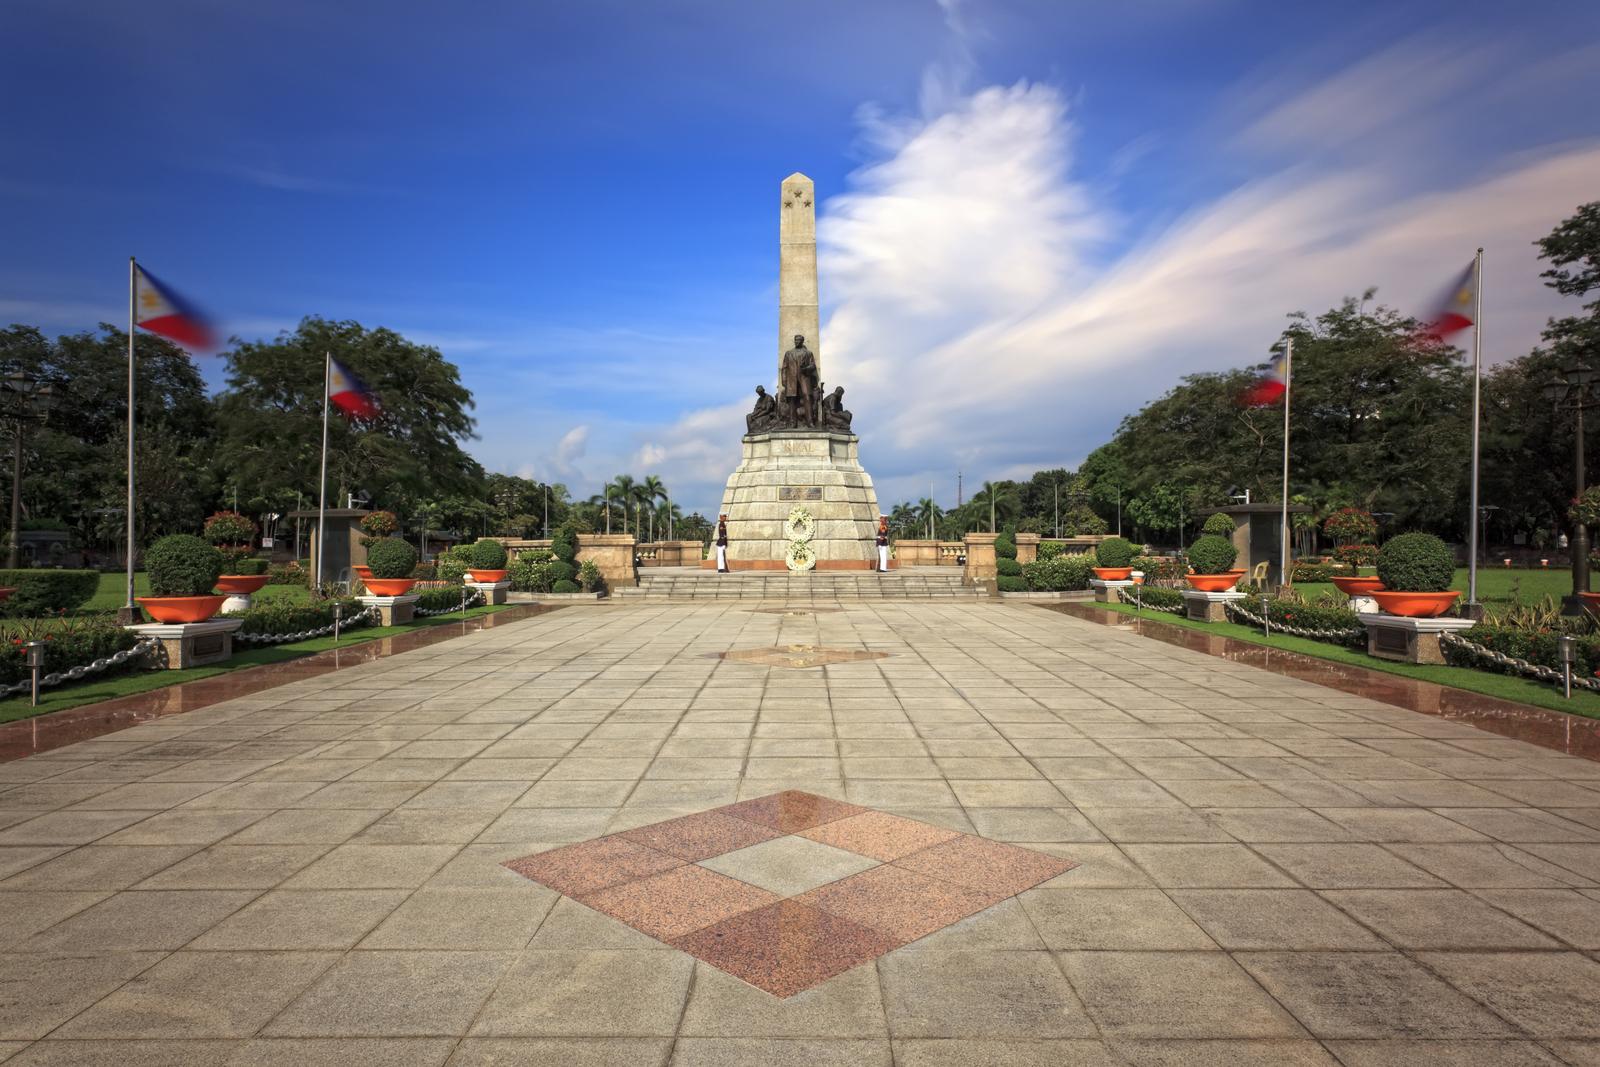 Cover image of this place Rizal Park